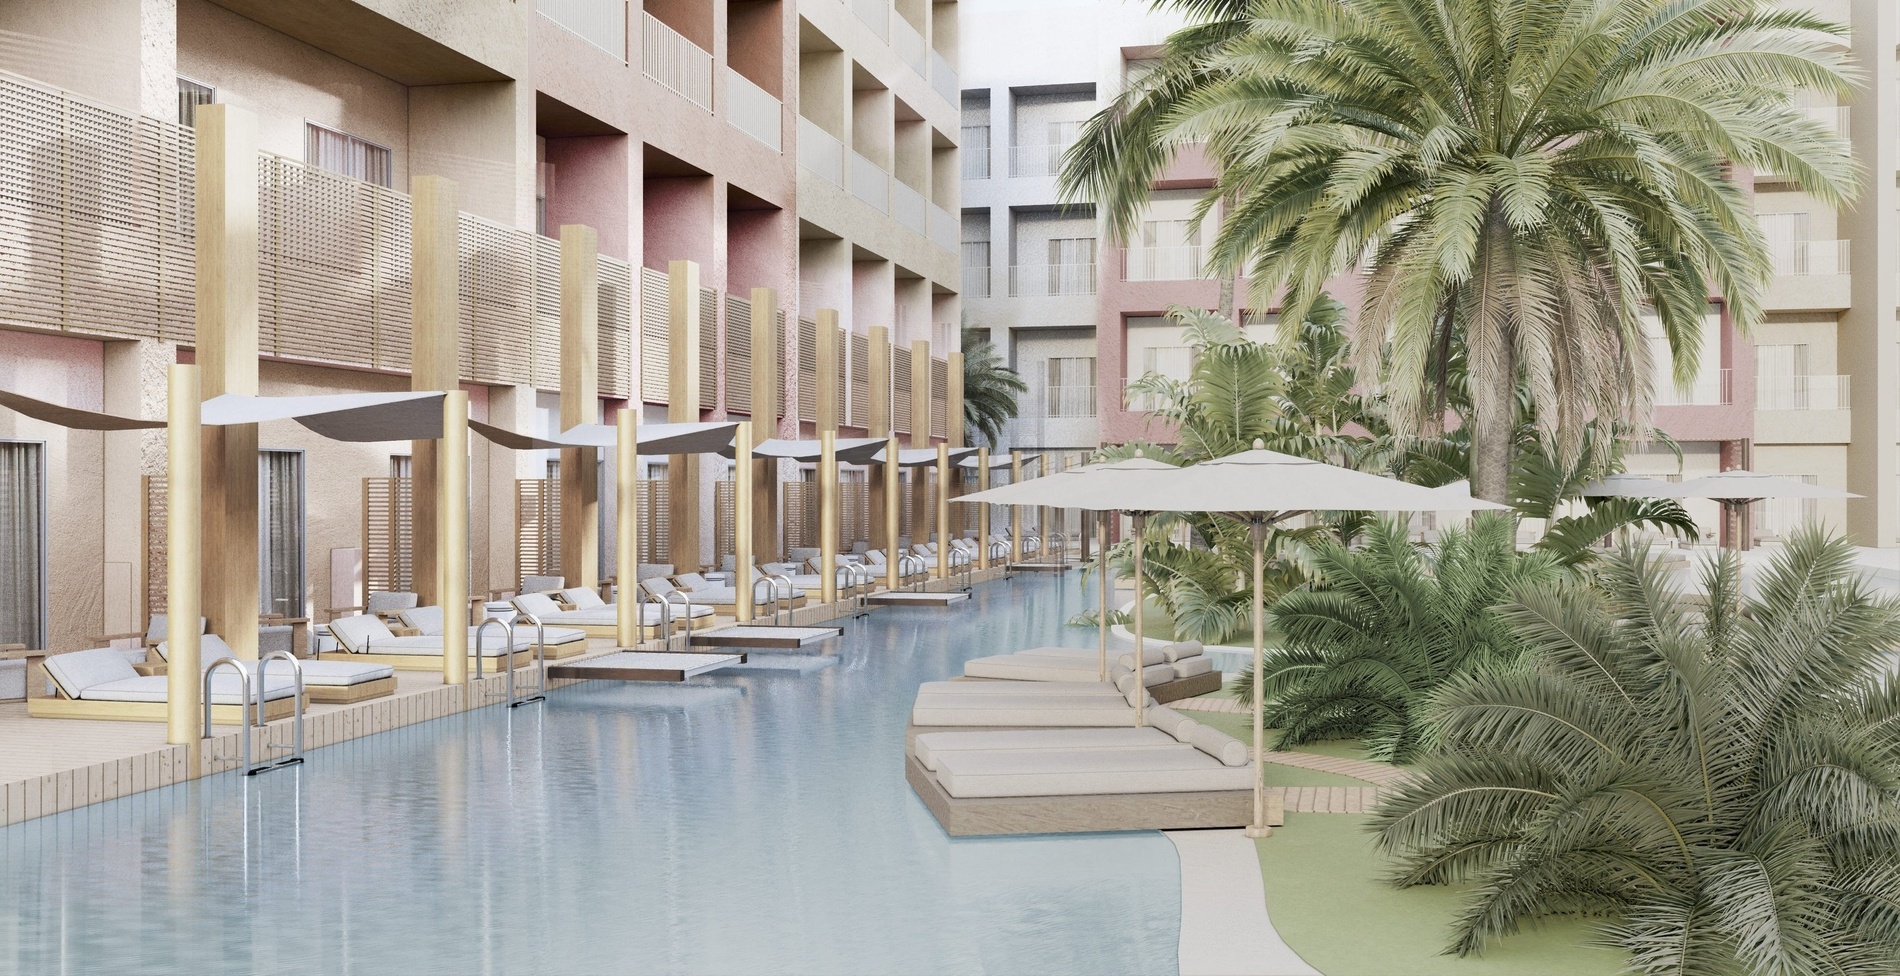 an artist 's impression of a hotel with a swimming pool